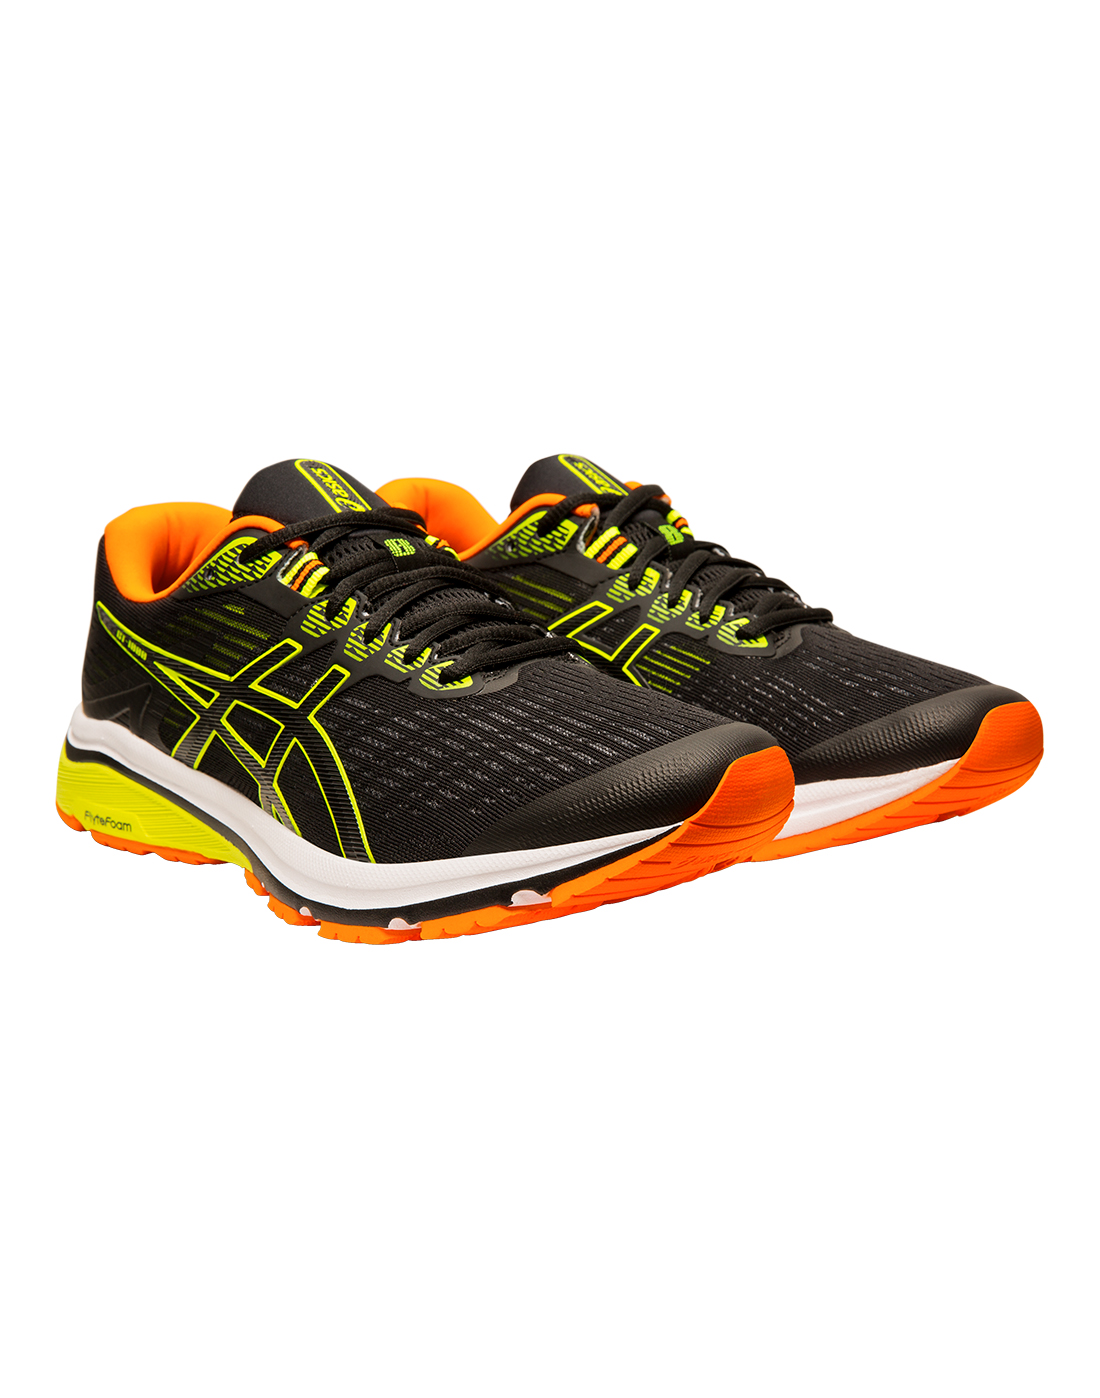 Asics Mens GT 1000 8 - Black | Life Style Sports IE